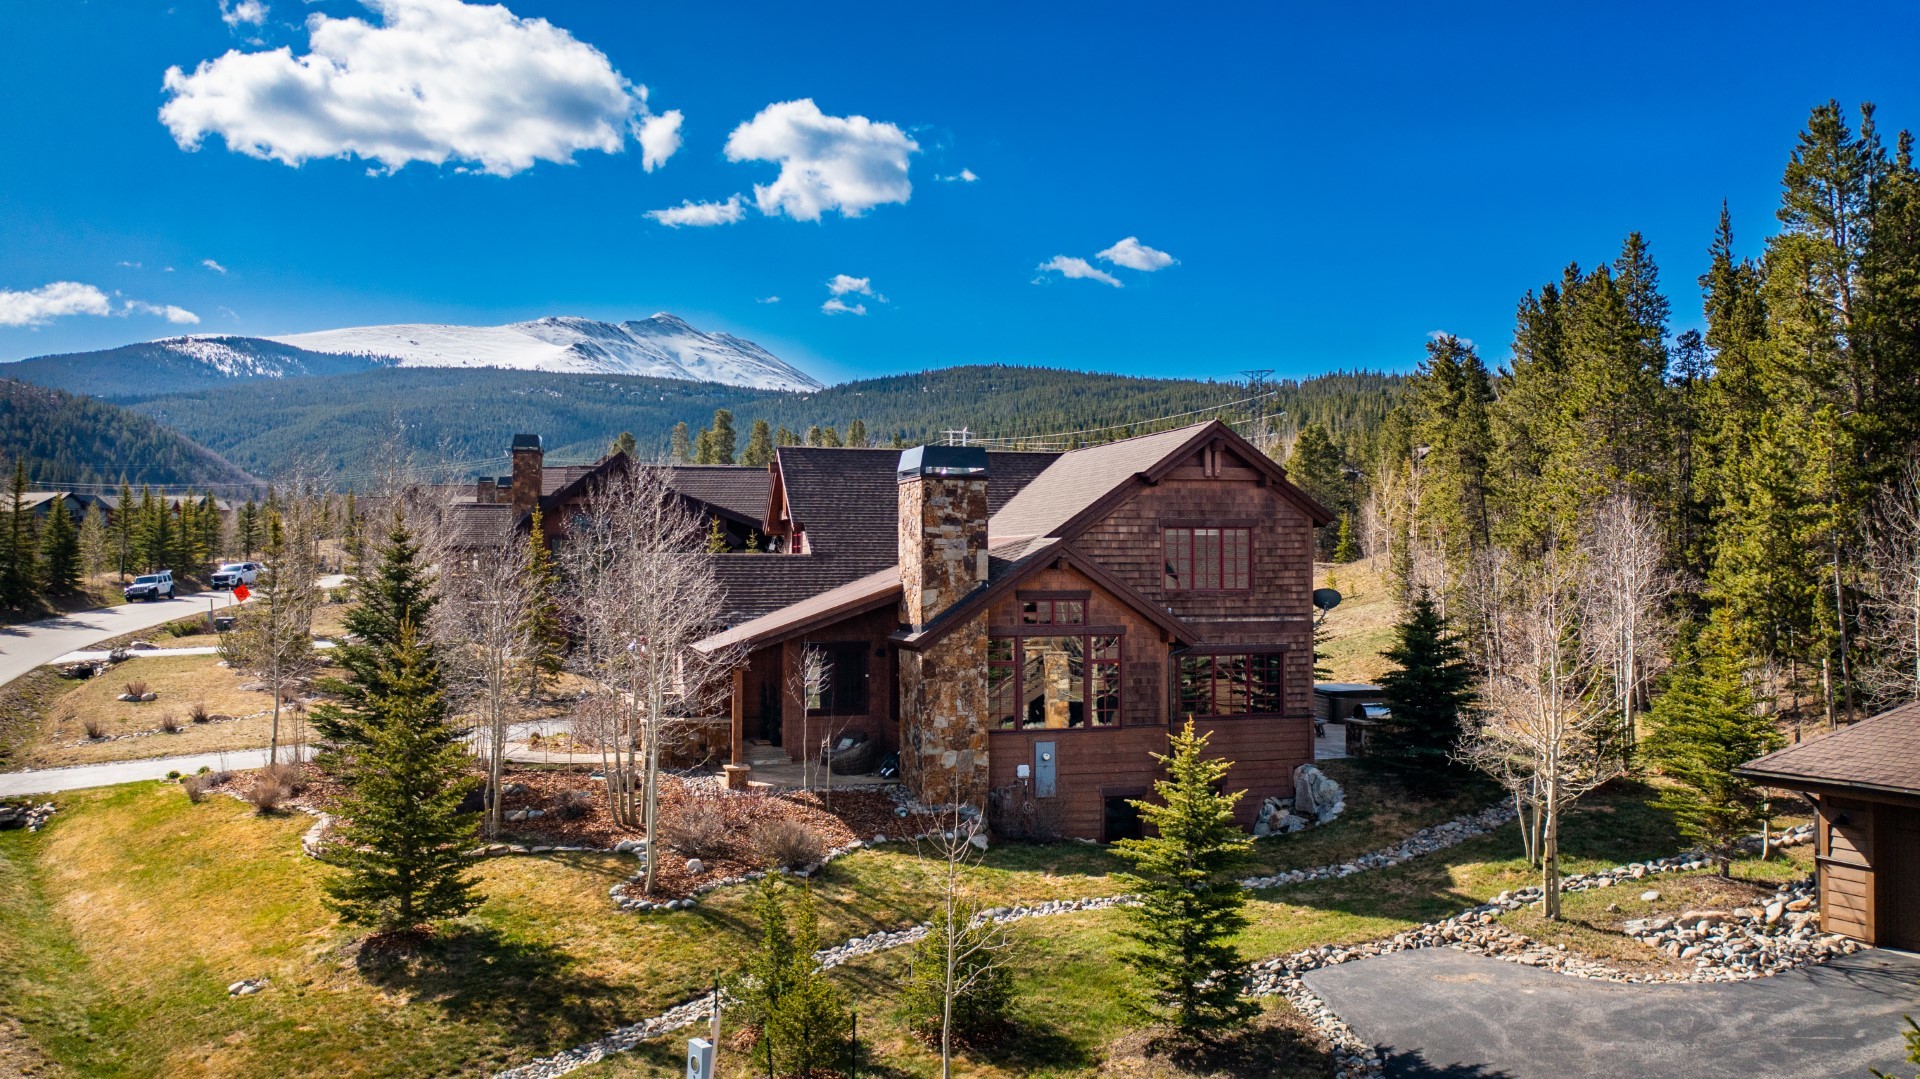 Comprehensive YTD Real Estate Stats and Performance for Summit County, Colorado